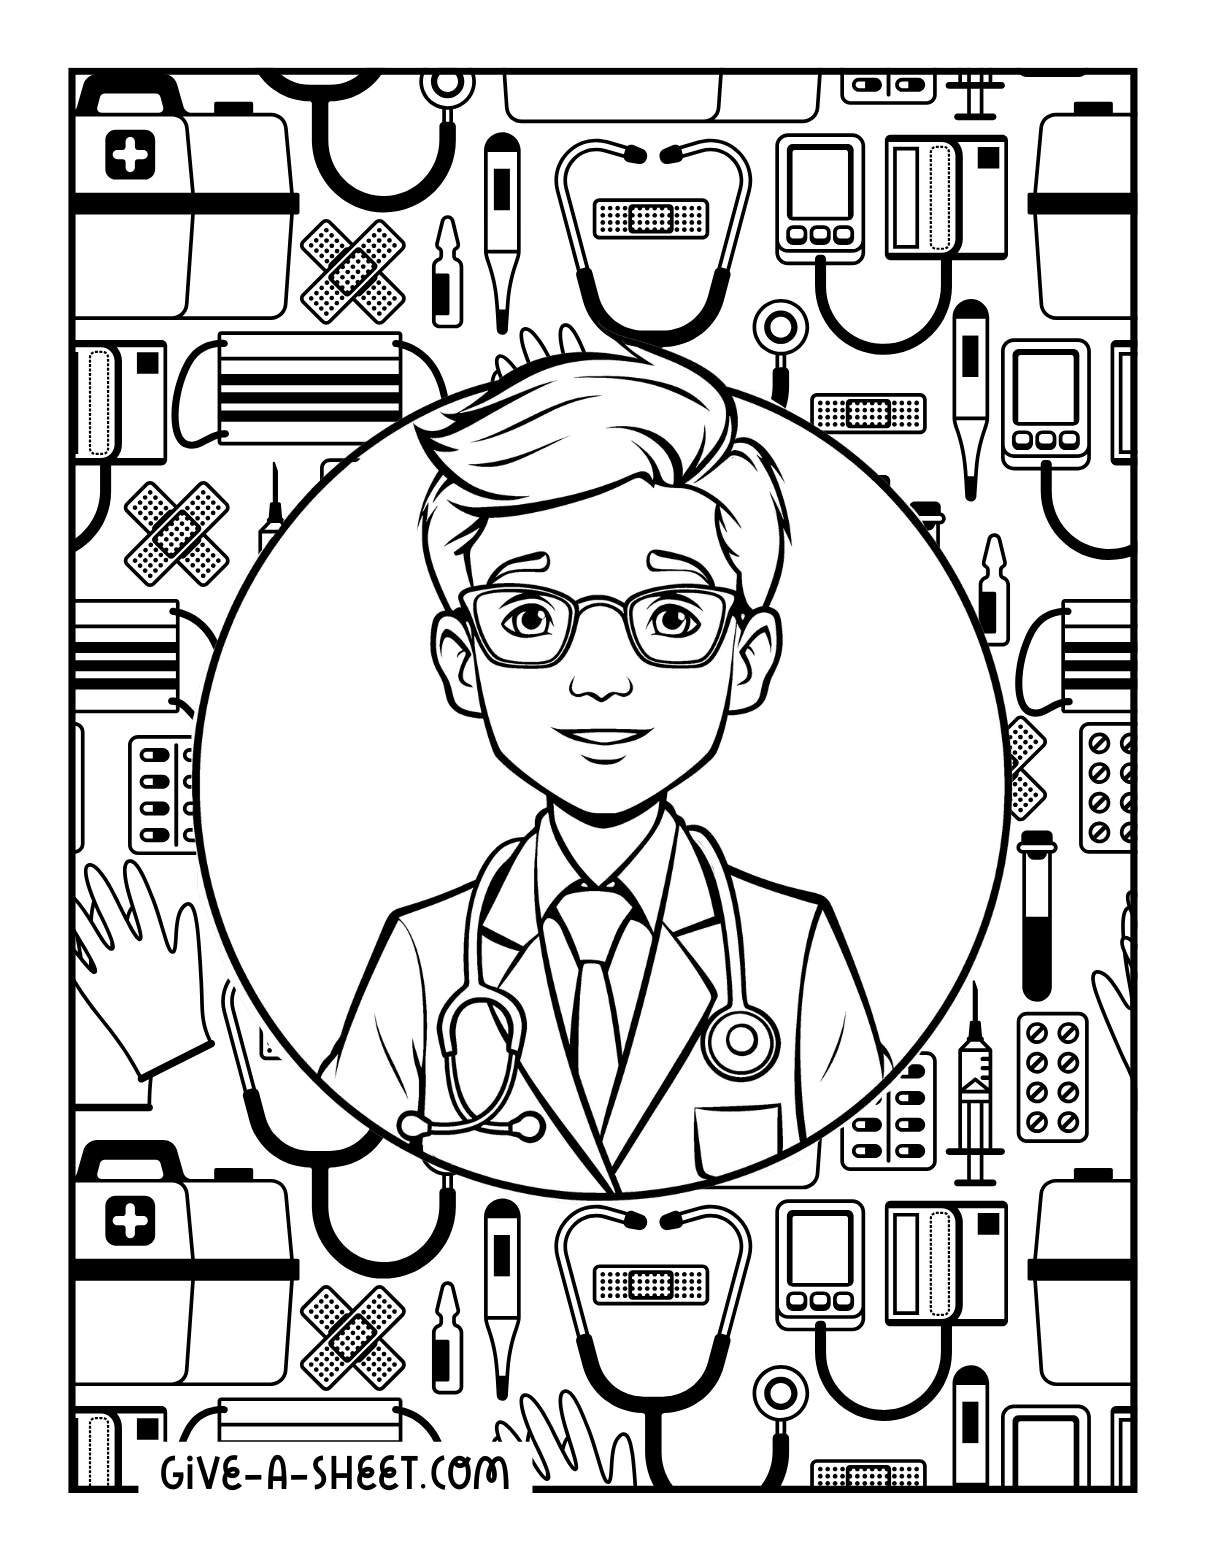 Detailed nurse coloring page for a medical profession.